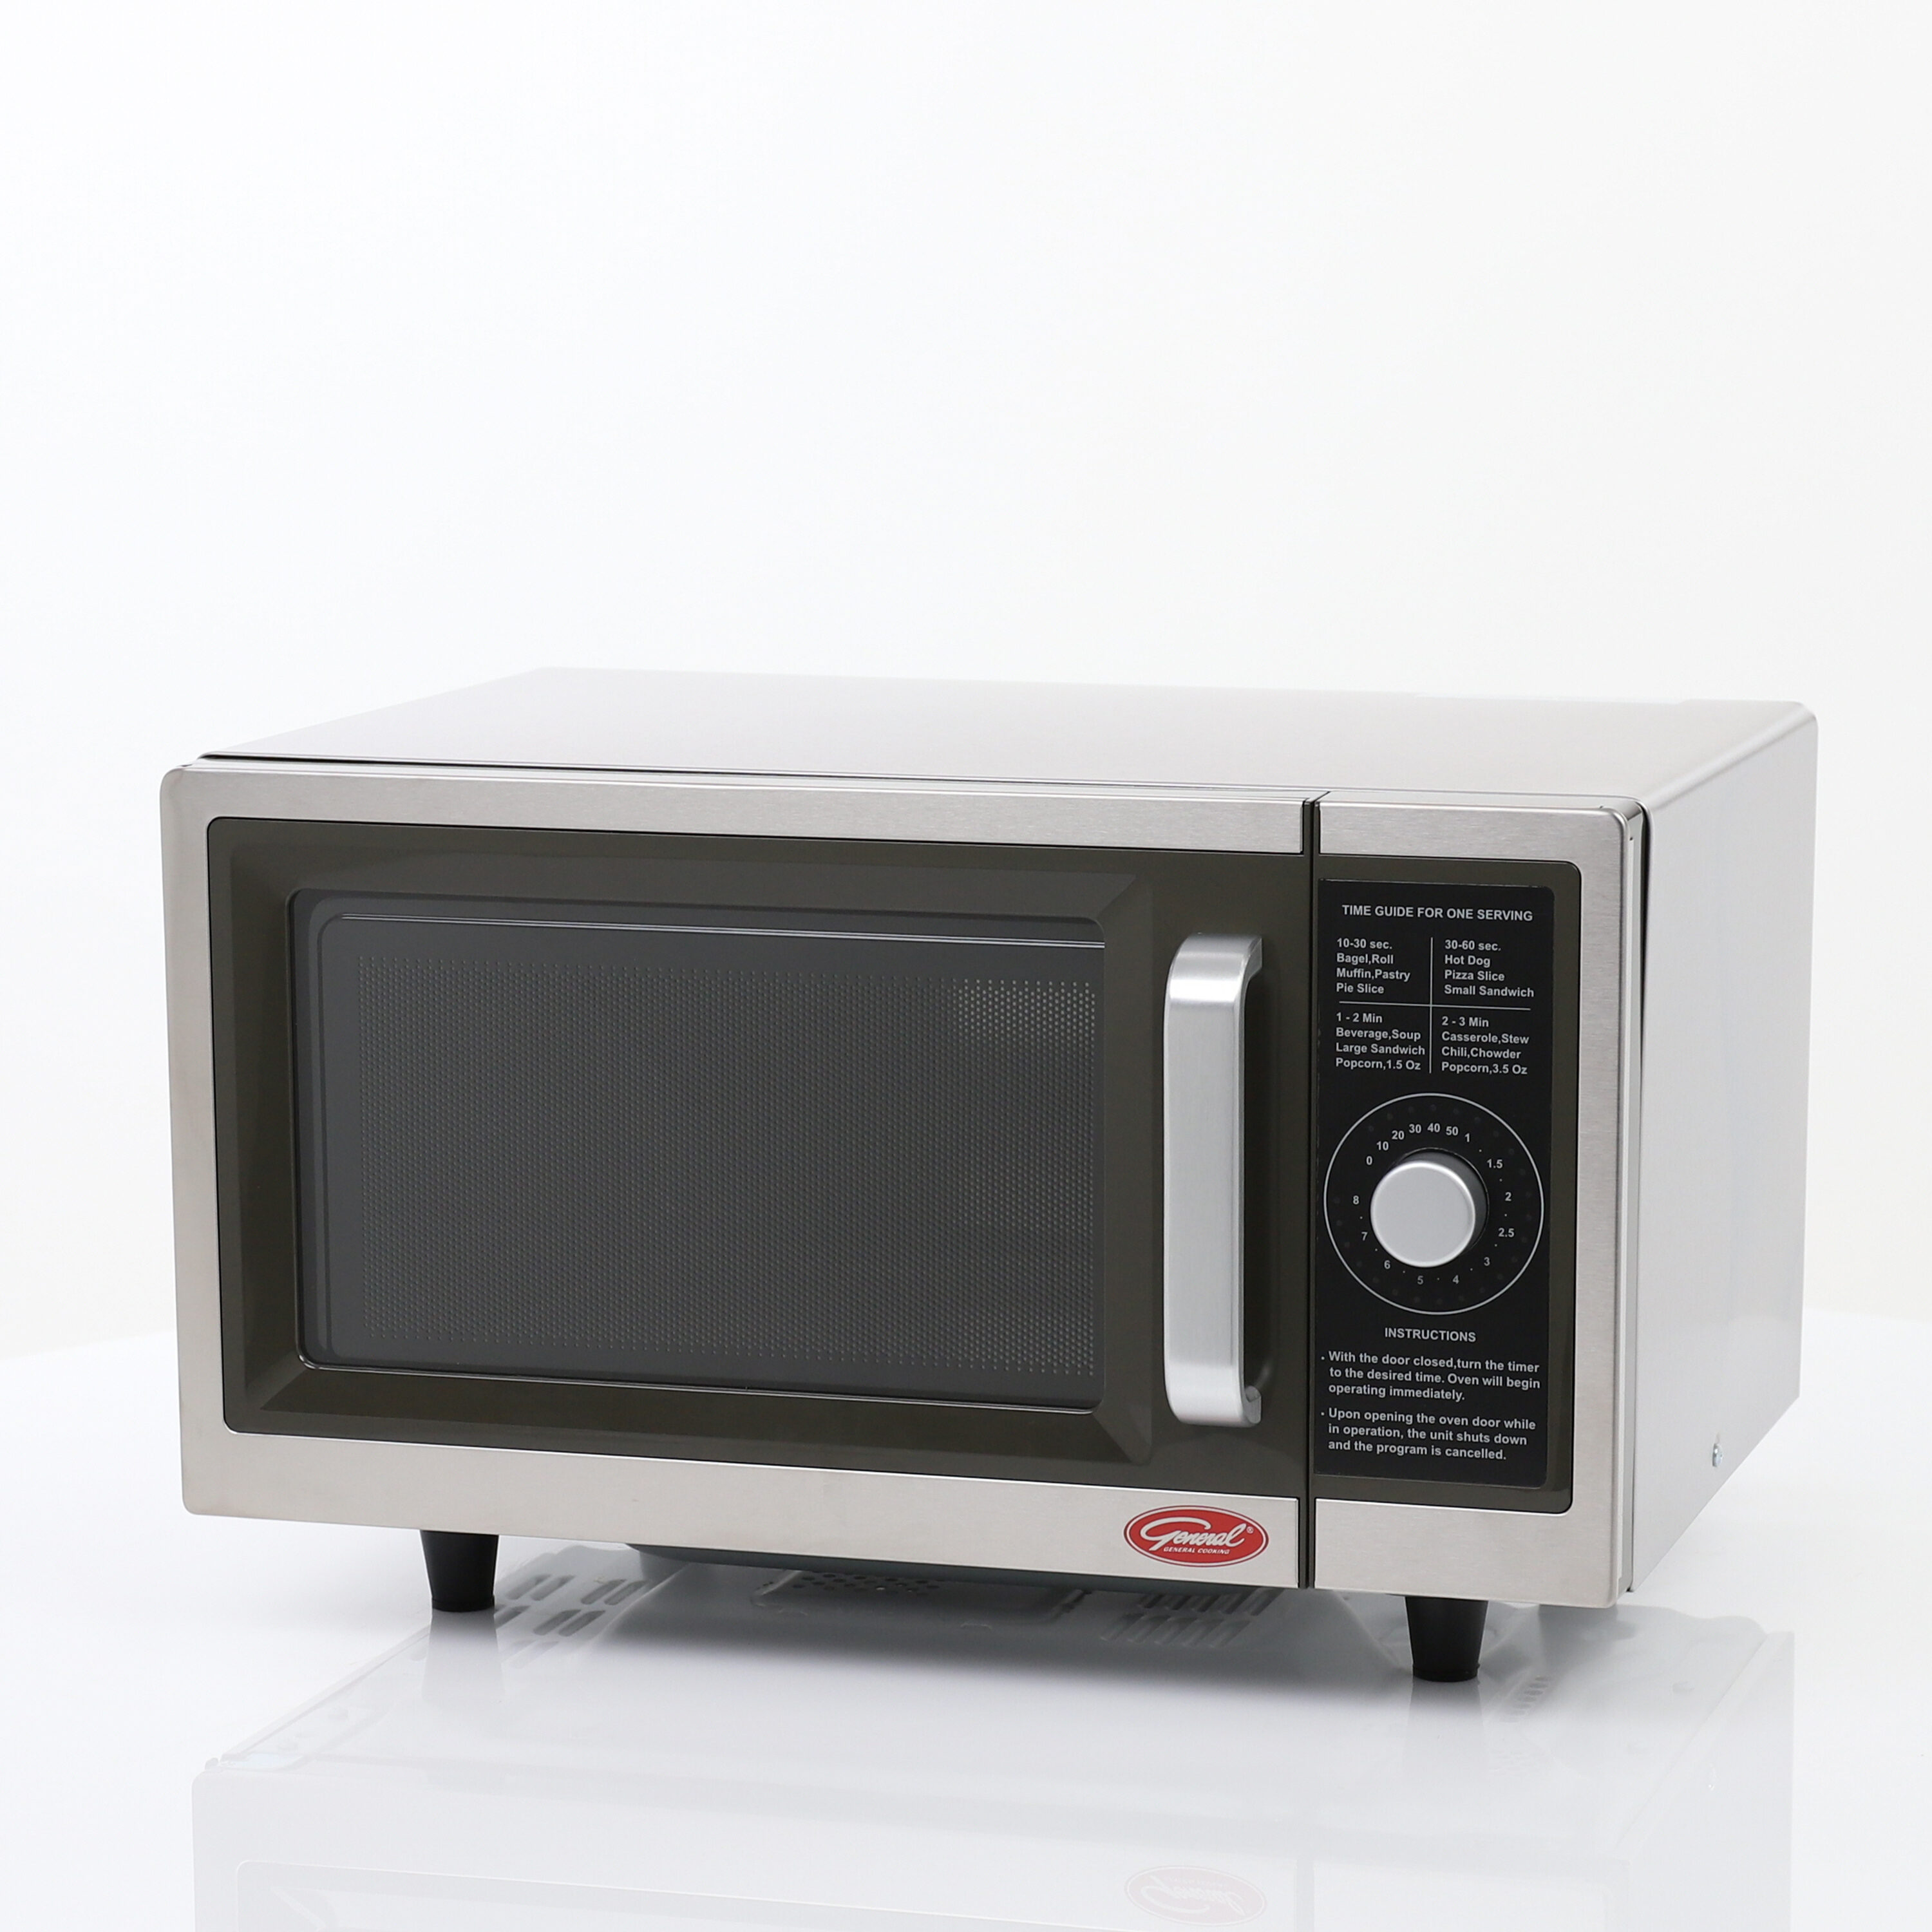 Total Chef Countertop Microwave Oven with Digital Controls